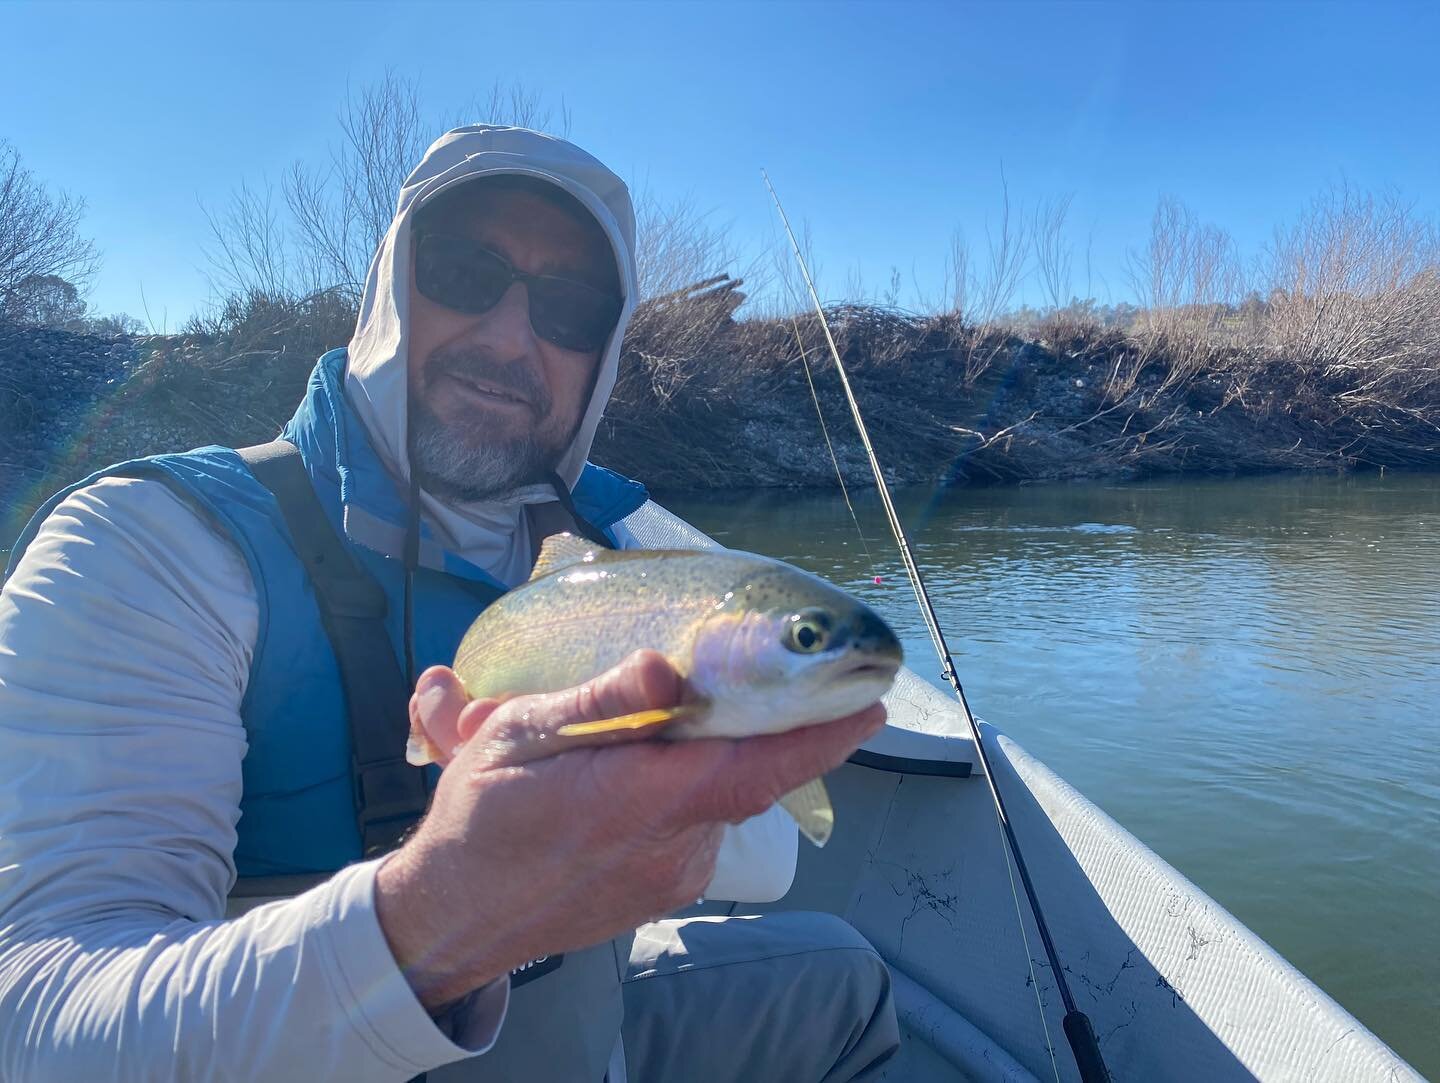 It doesn&rsquo;t feel like winter in the valley right now&hellip;

Except when you get a 25 x 11.5 steelhead on the size 16 nymph..

Great trout fishing as well!

#fishca #flyfishing #norcalflyfishing